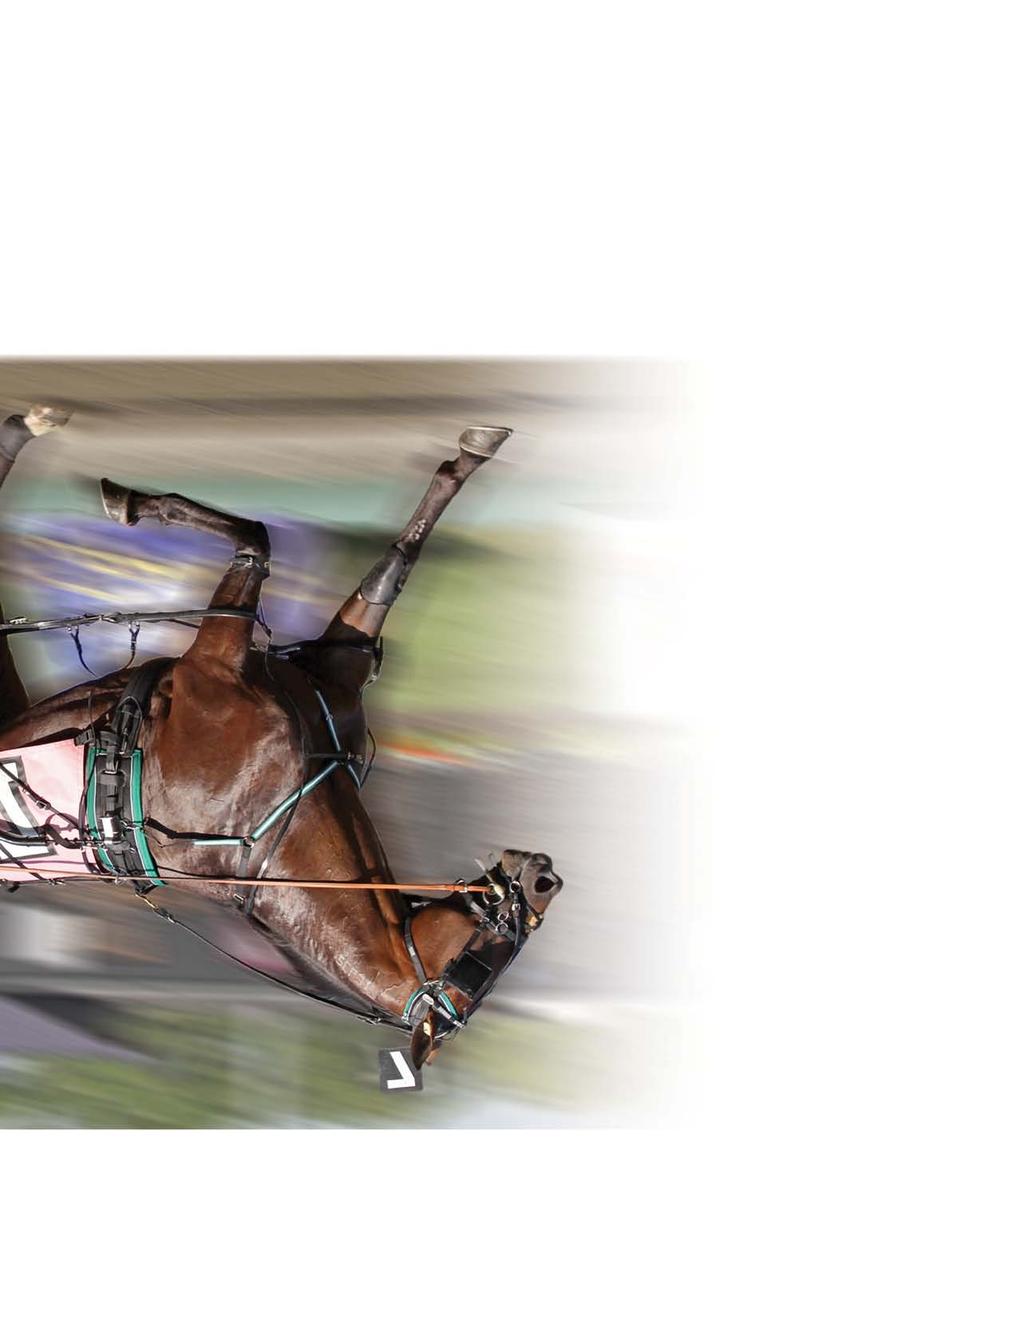 One of the fastest & richest sons of the great Rocknroll Hanover ROCKIN IMAGE ROCKIN IMAGE p,2,1:50.4; 3,1:48.